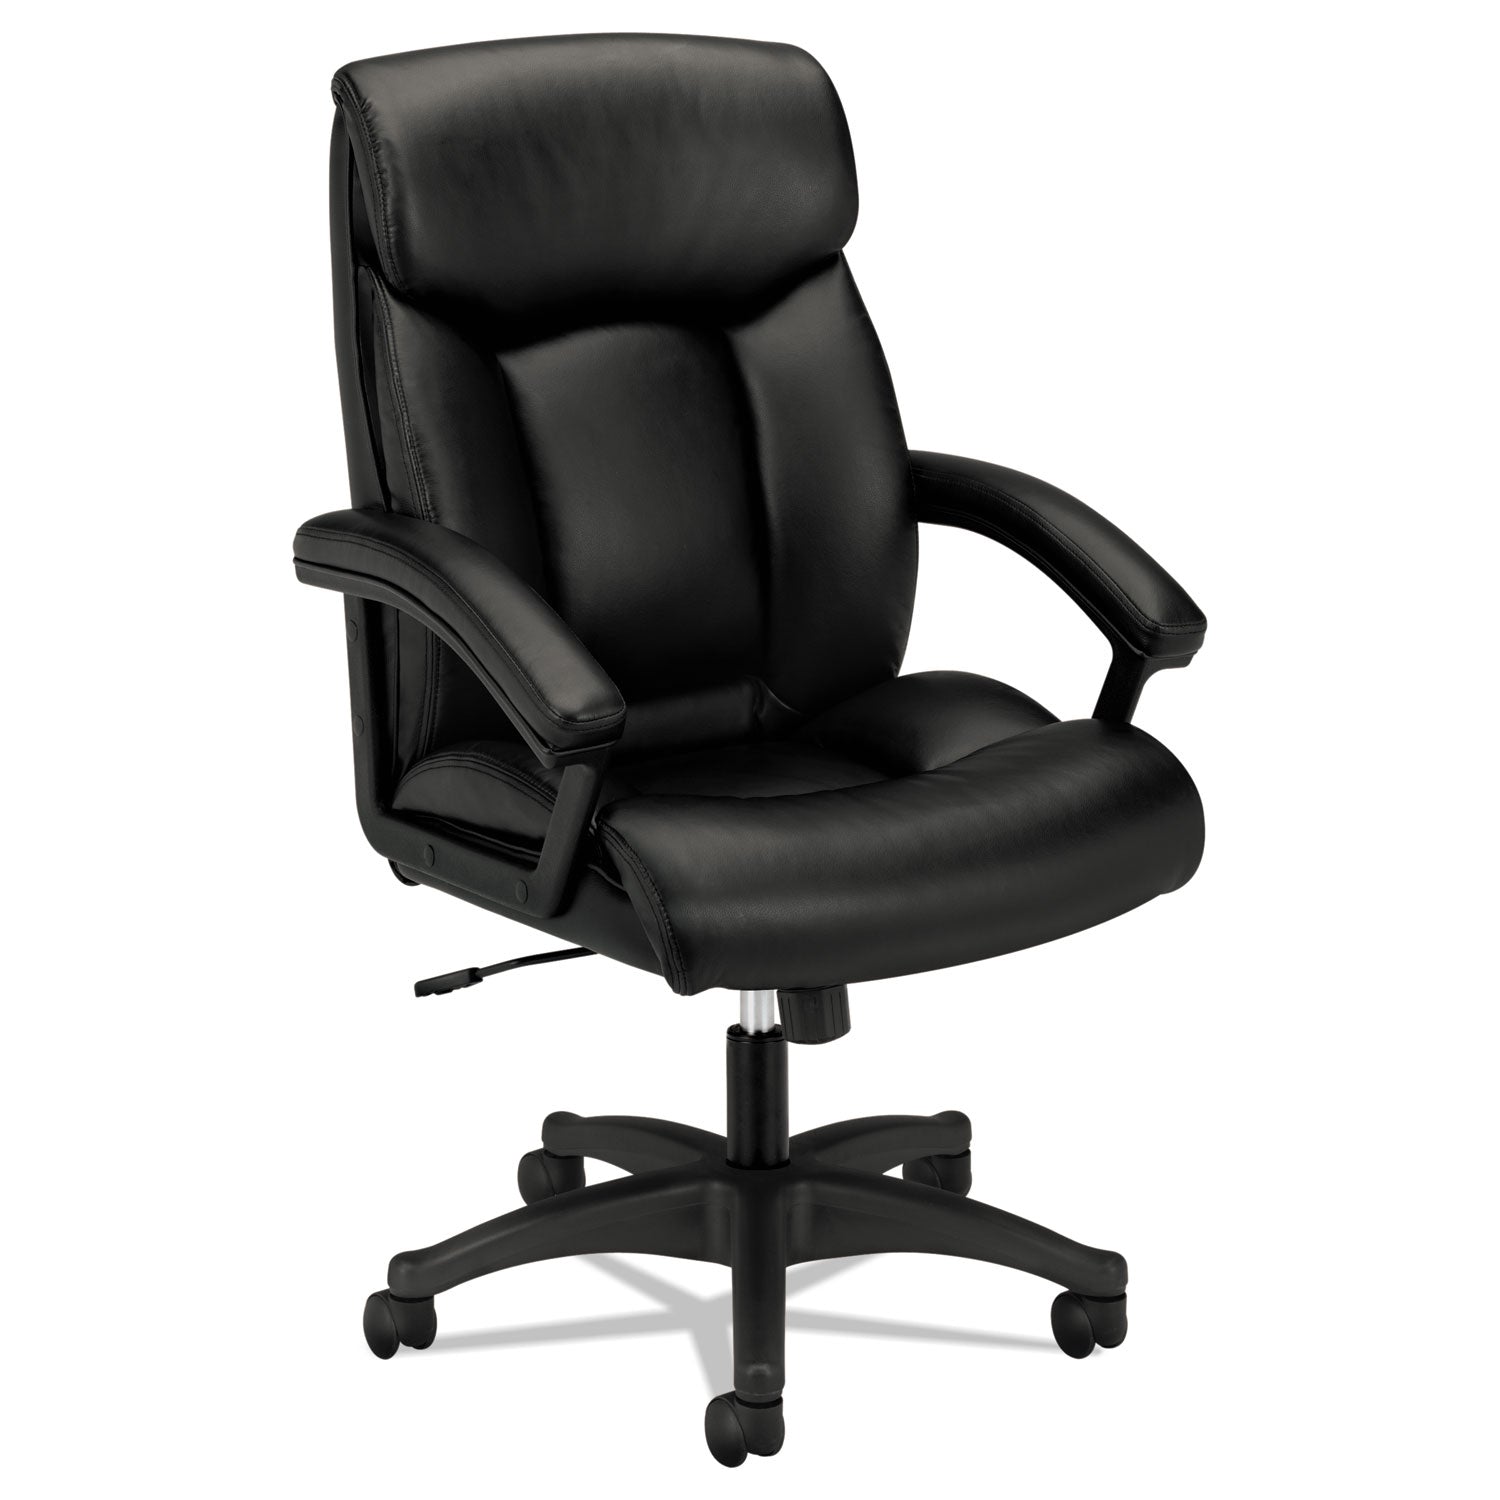 HVL151 Executive High-Back Leather Chair, Supports Up to 250 lb, 17.75" to 21.5" Seat Height, Black - 